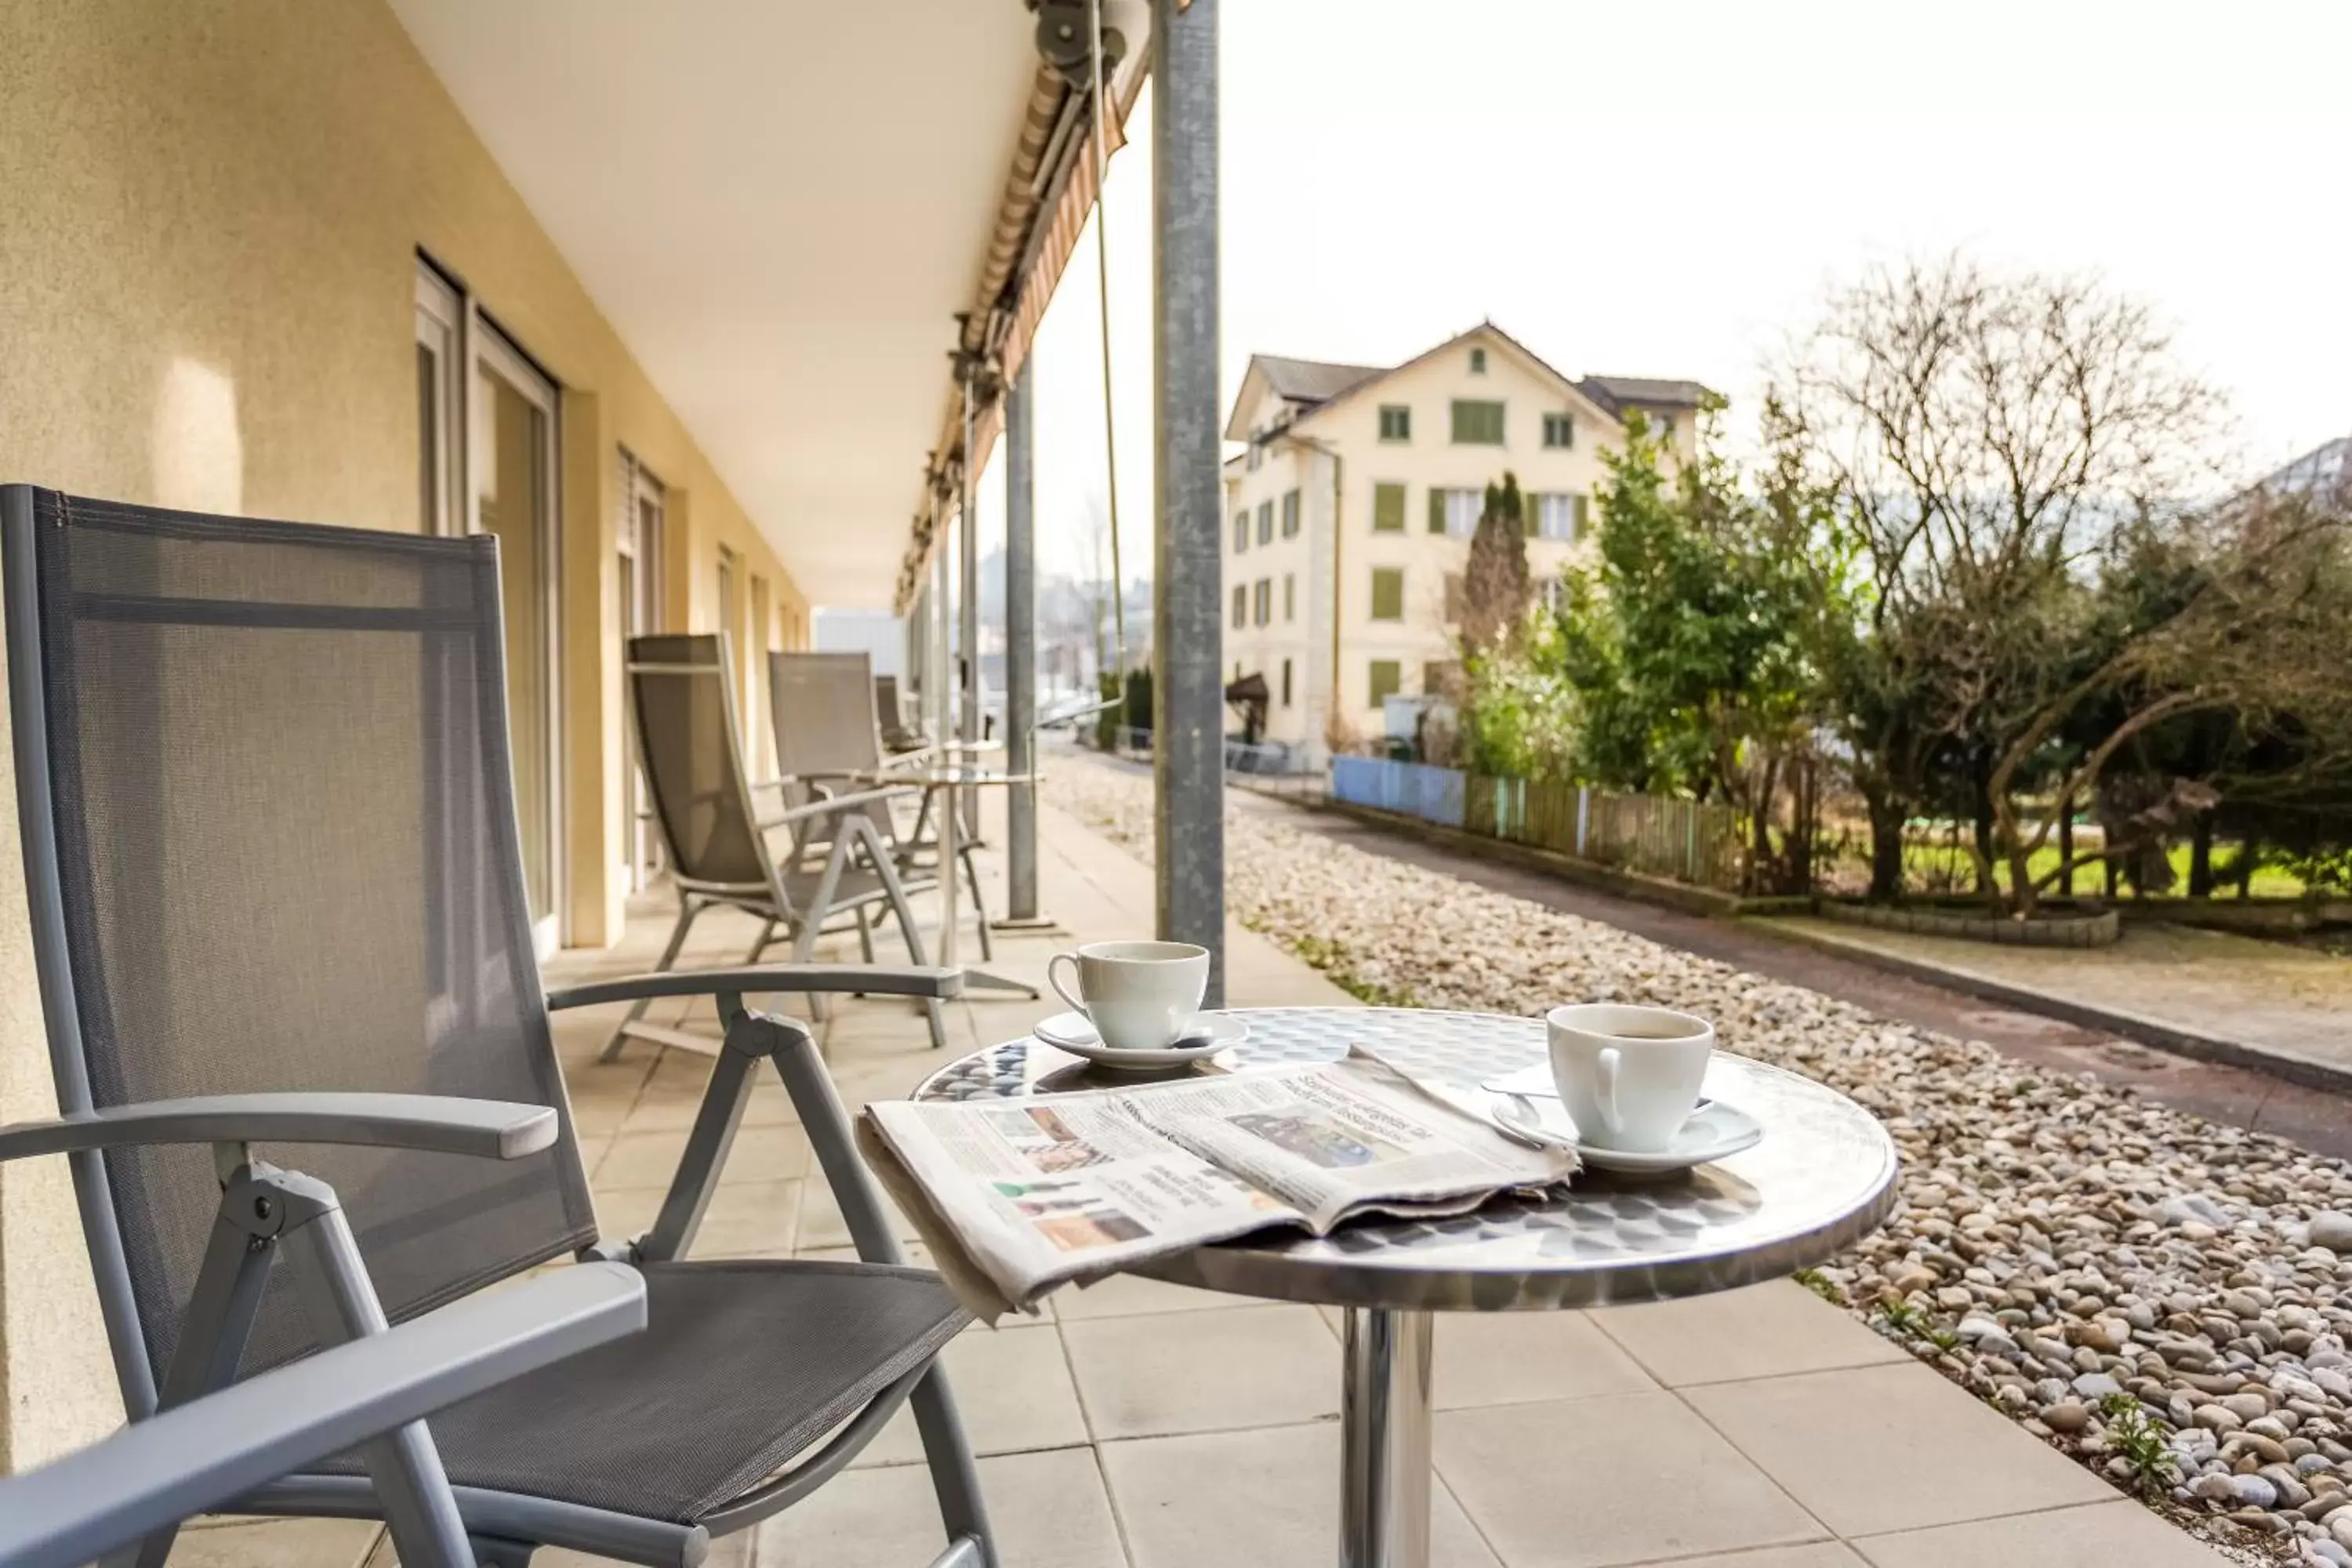 Balcony/Terrace in Anstatthotel Luzern - contactless check-in